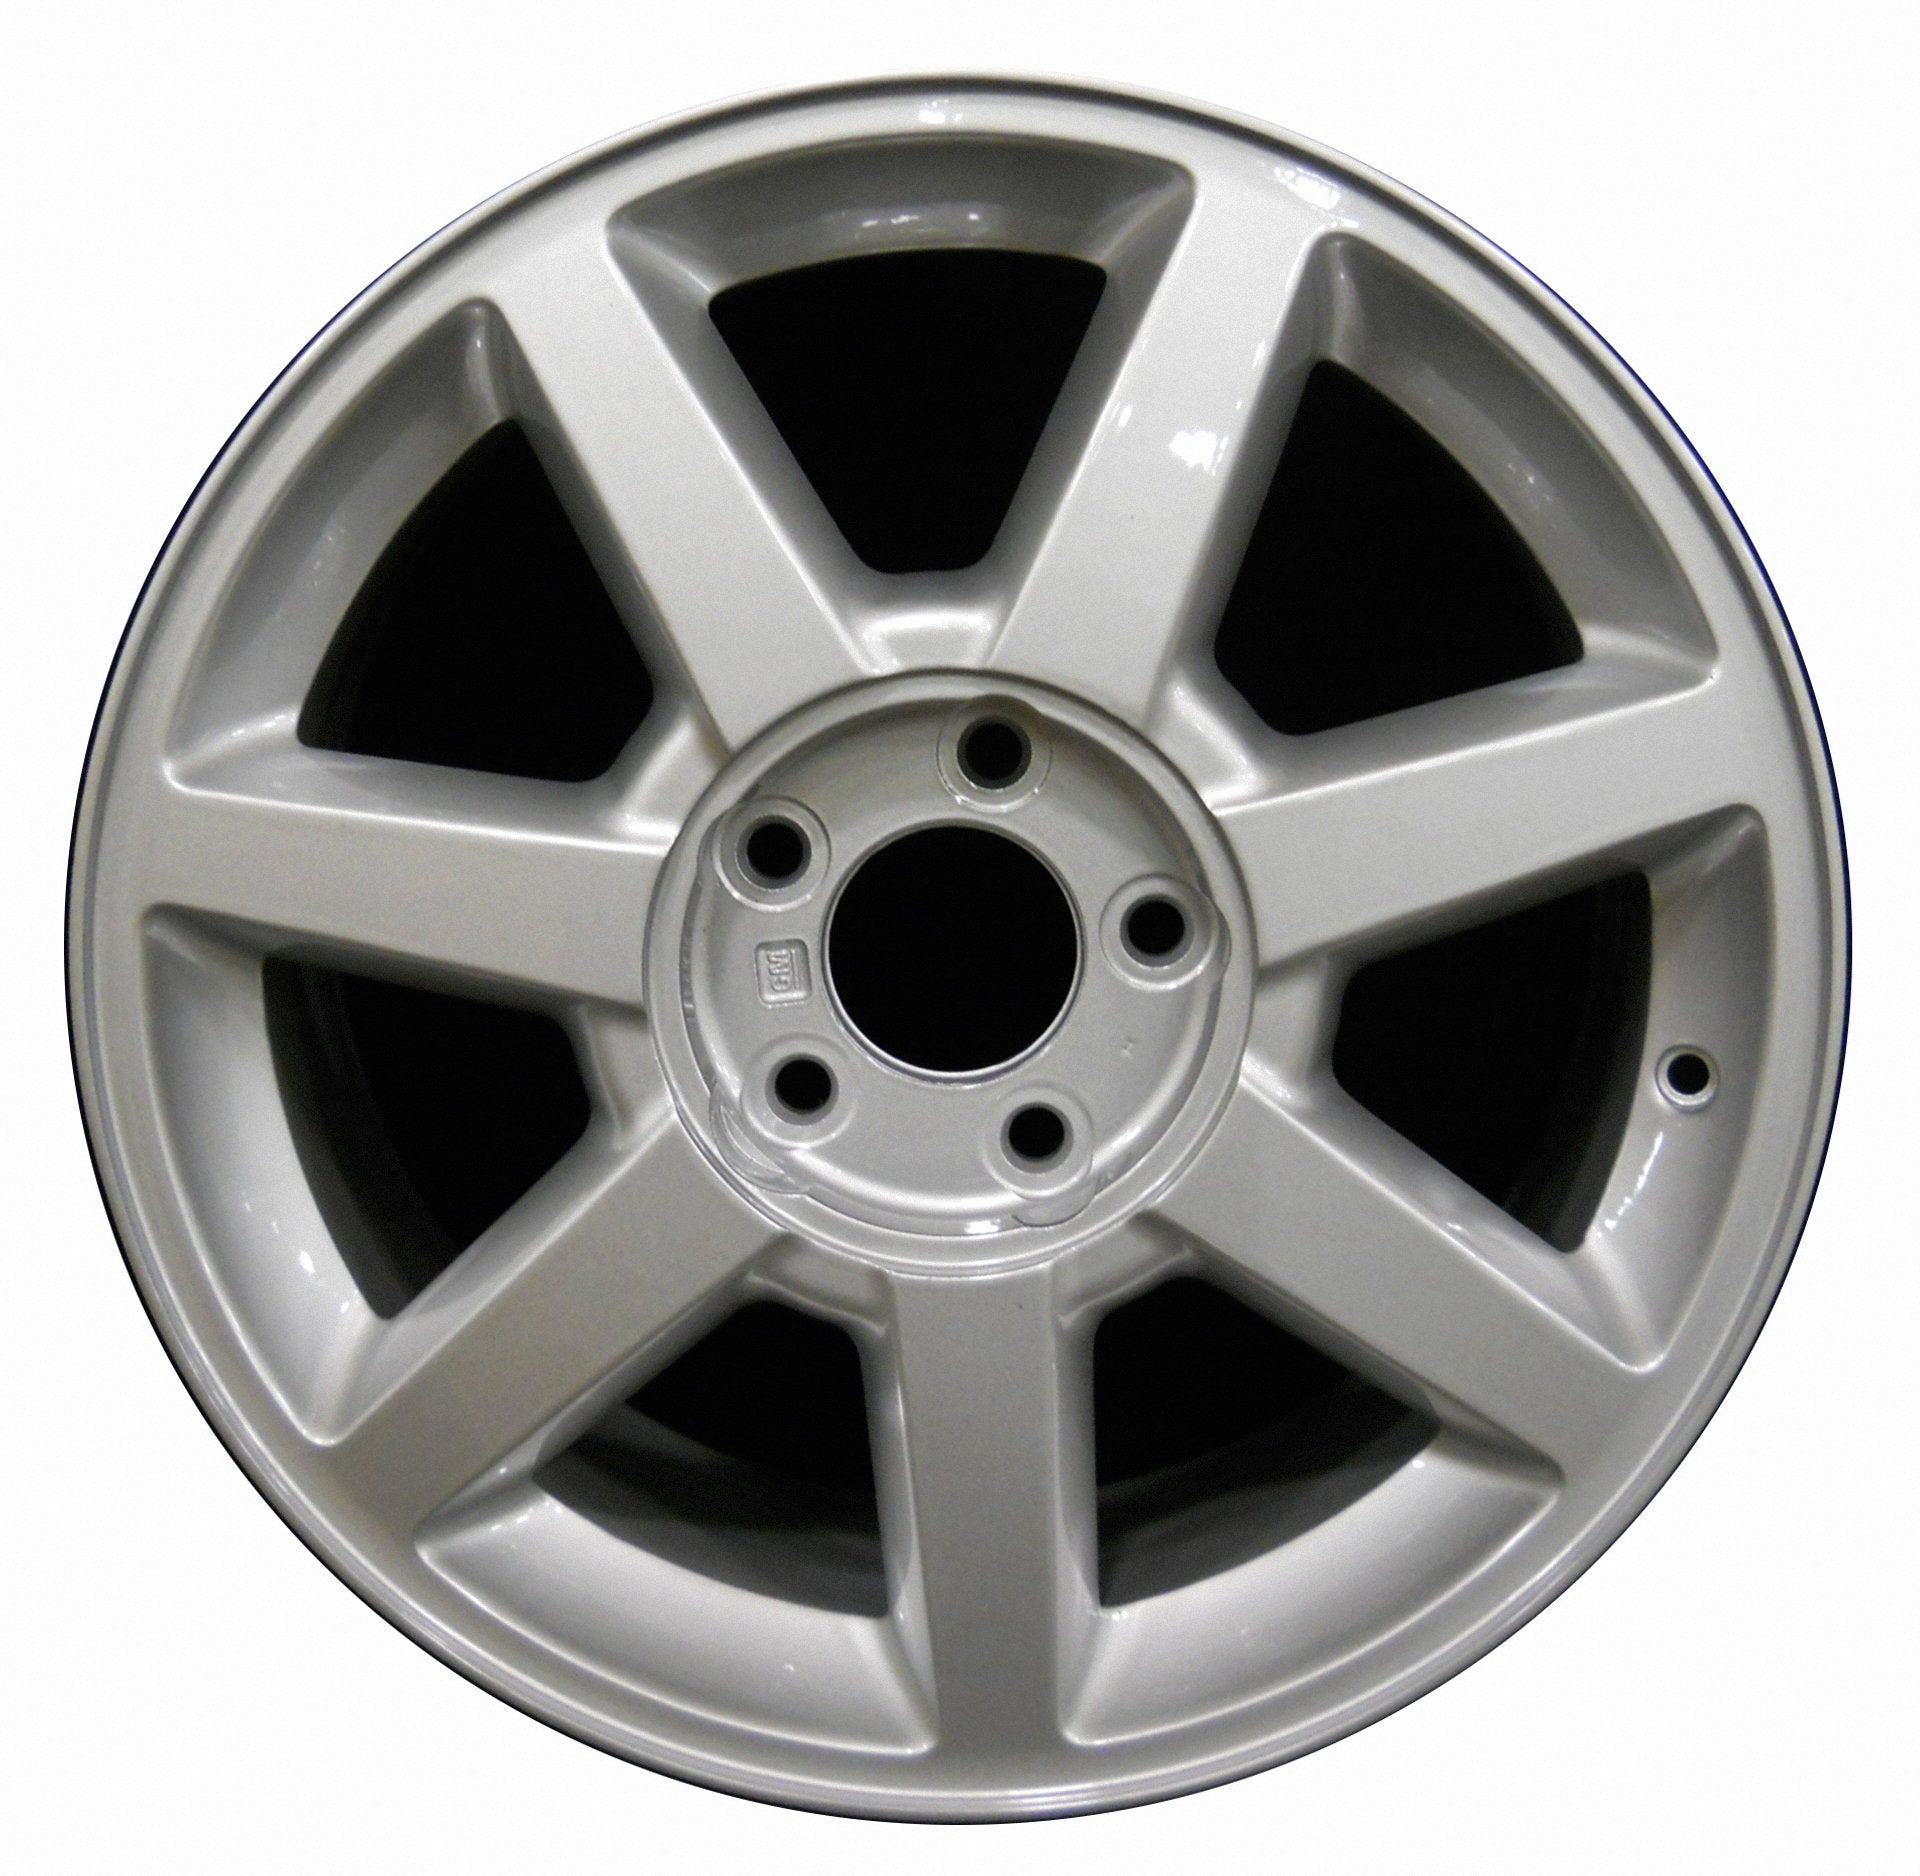 Cadillac STS  2004, 2005, 2006, 2007, 2008, 2009, 2010, 2011 Factory OEM Car Wheel Size 17x7.5 Alloy WAO.4578FT.LS01.FF